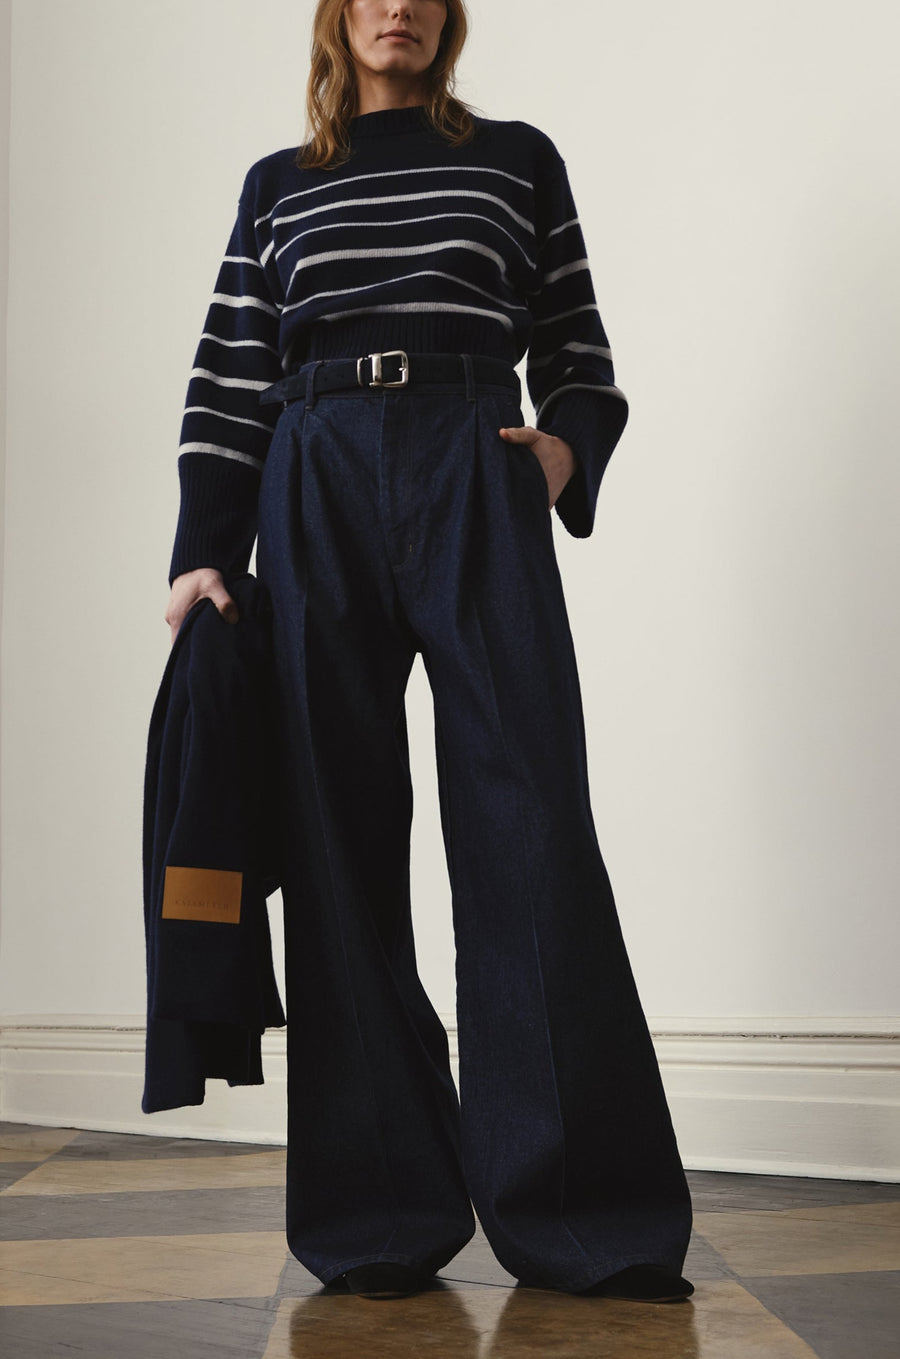 Paloma Sweater in Navy and White Stripe